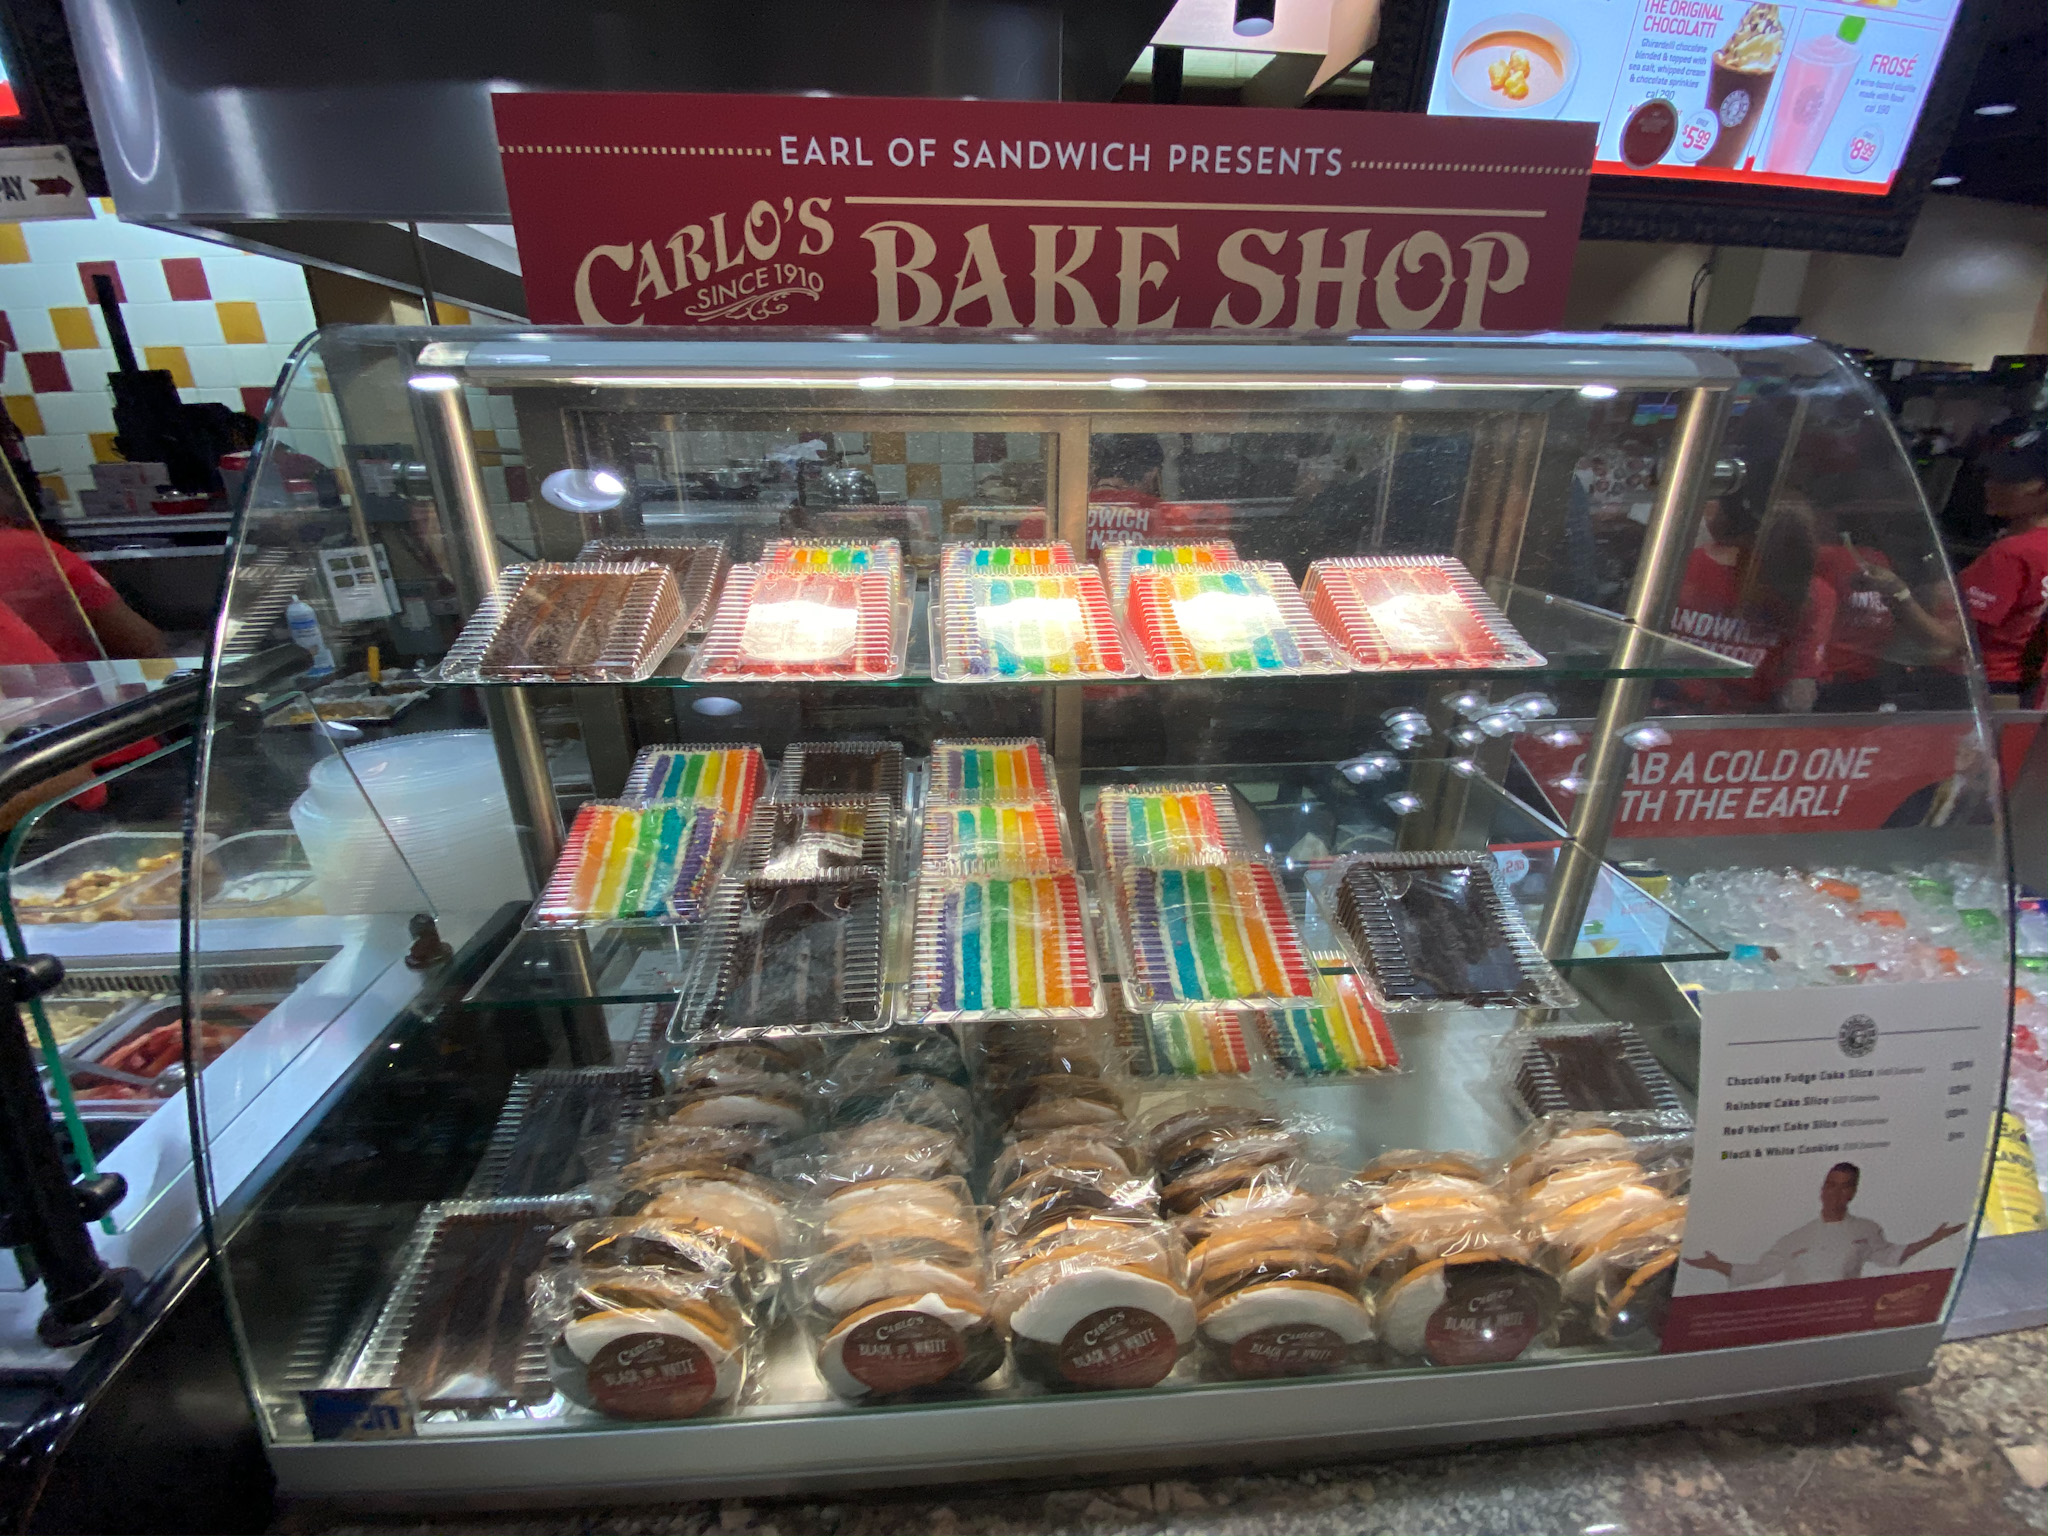 Cake Boss Desserts Now Available at Disney Springs